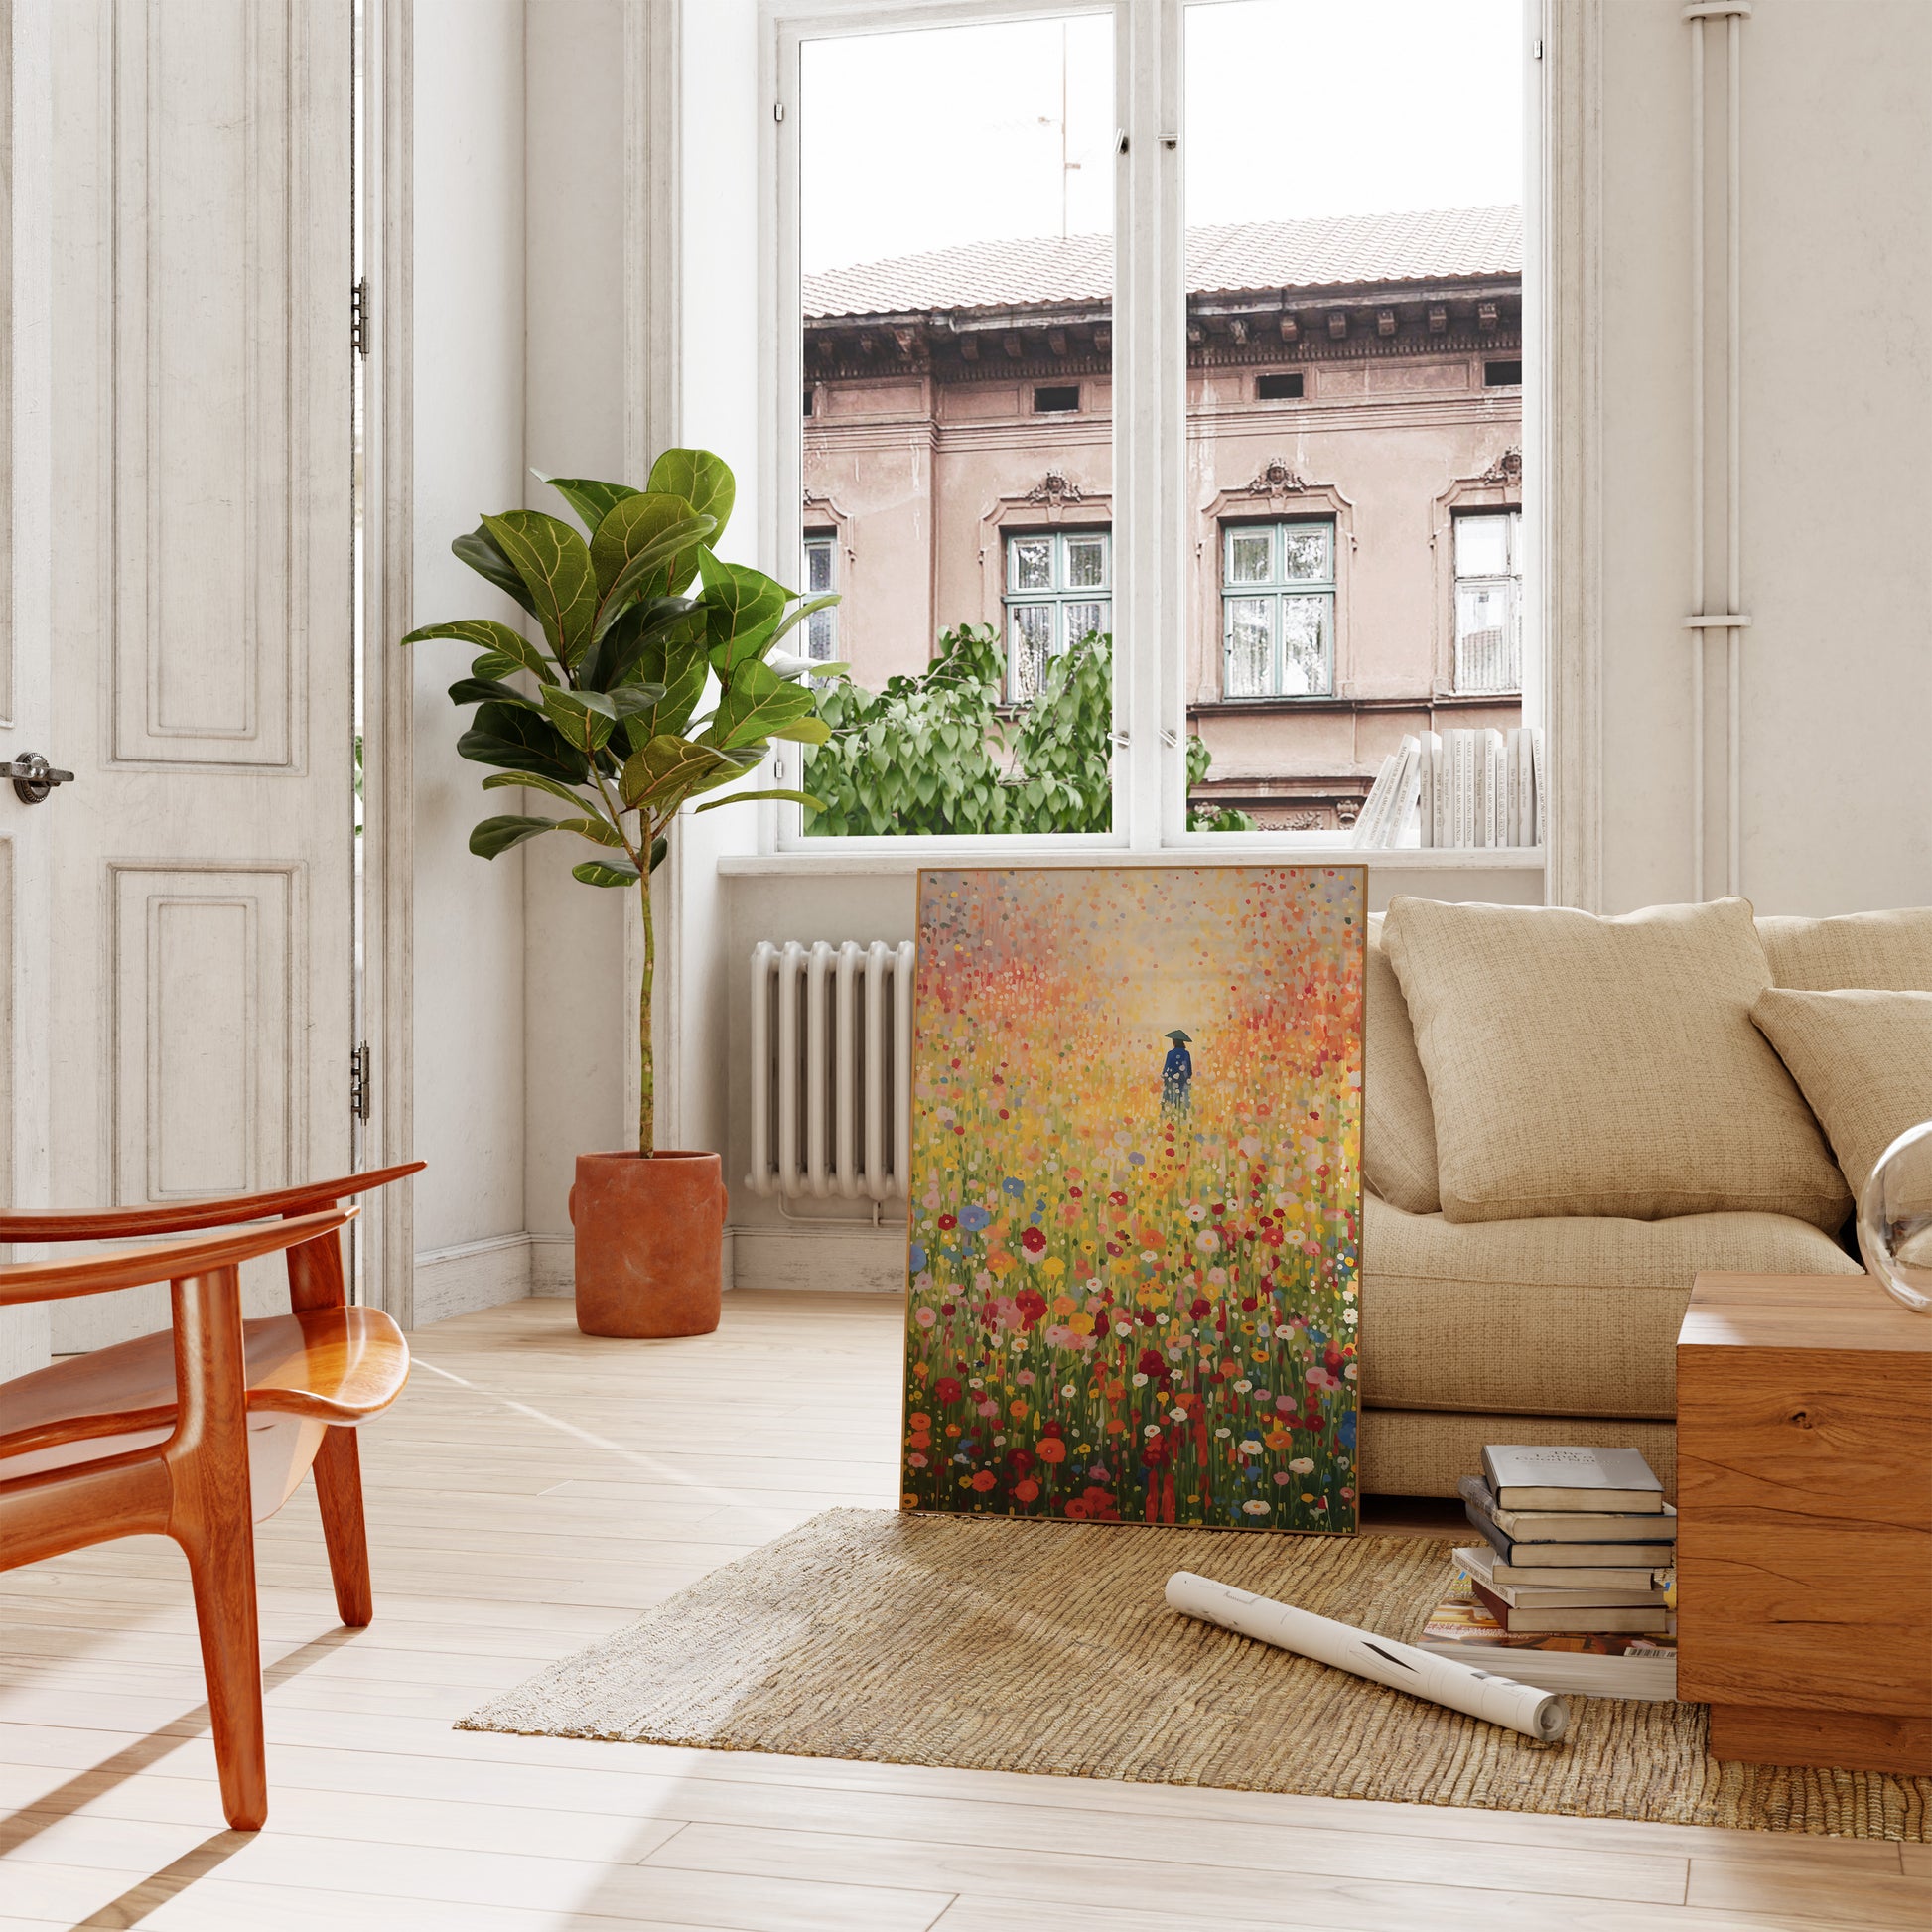 Bright, cozy living room with a large floral painting leaning against the wall, next to a green plant.